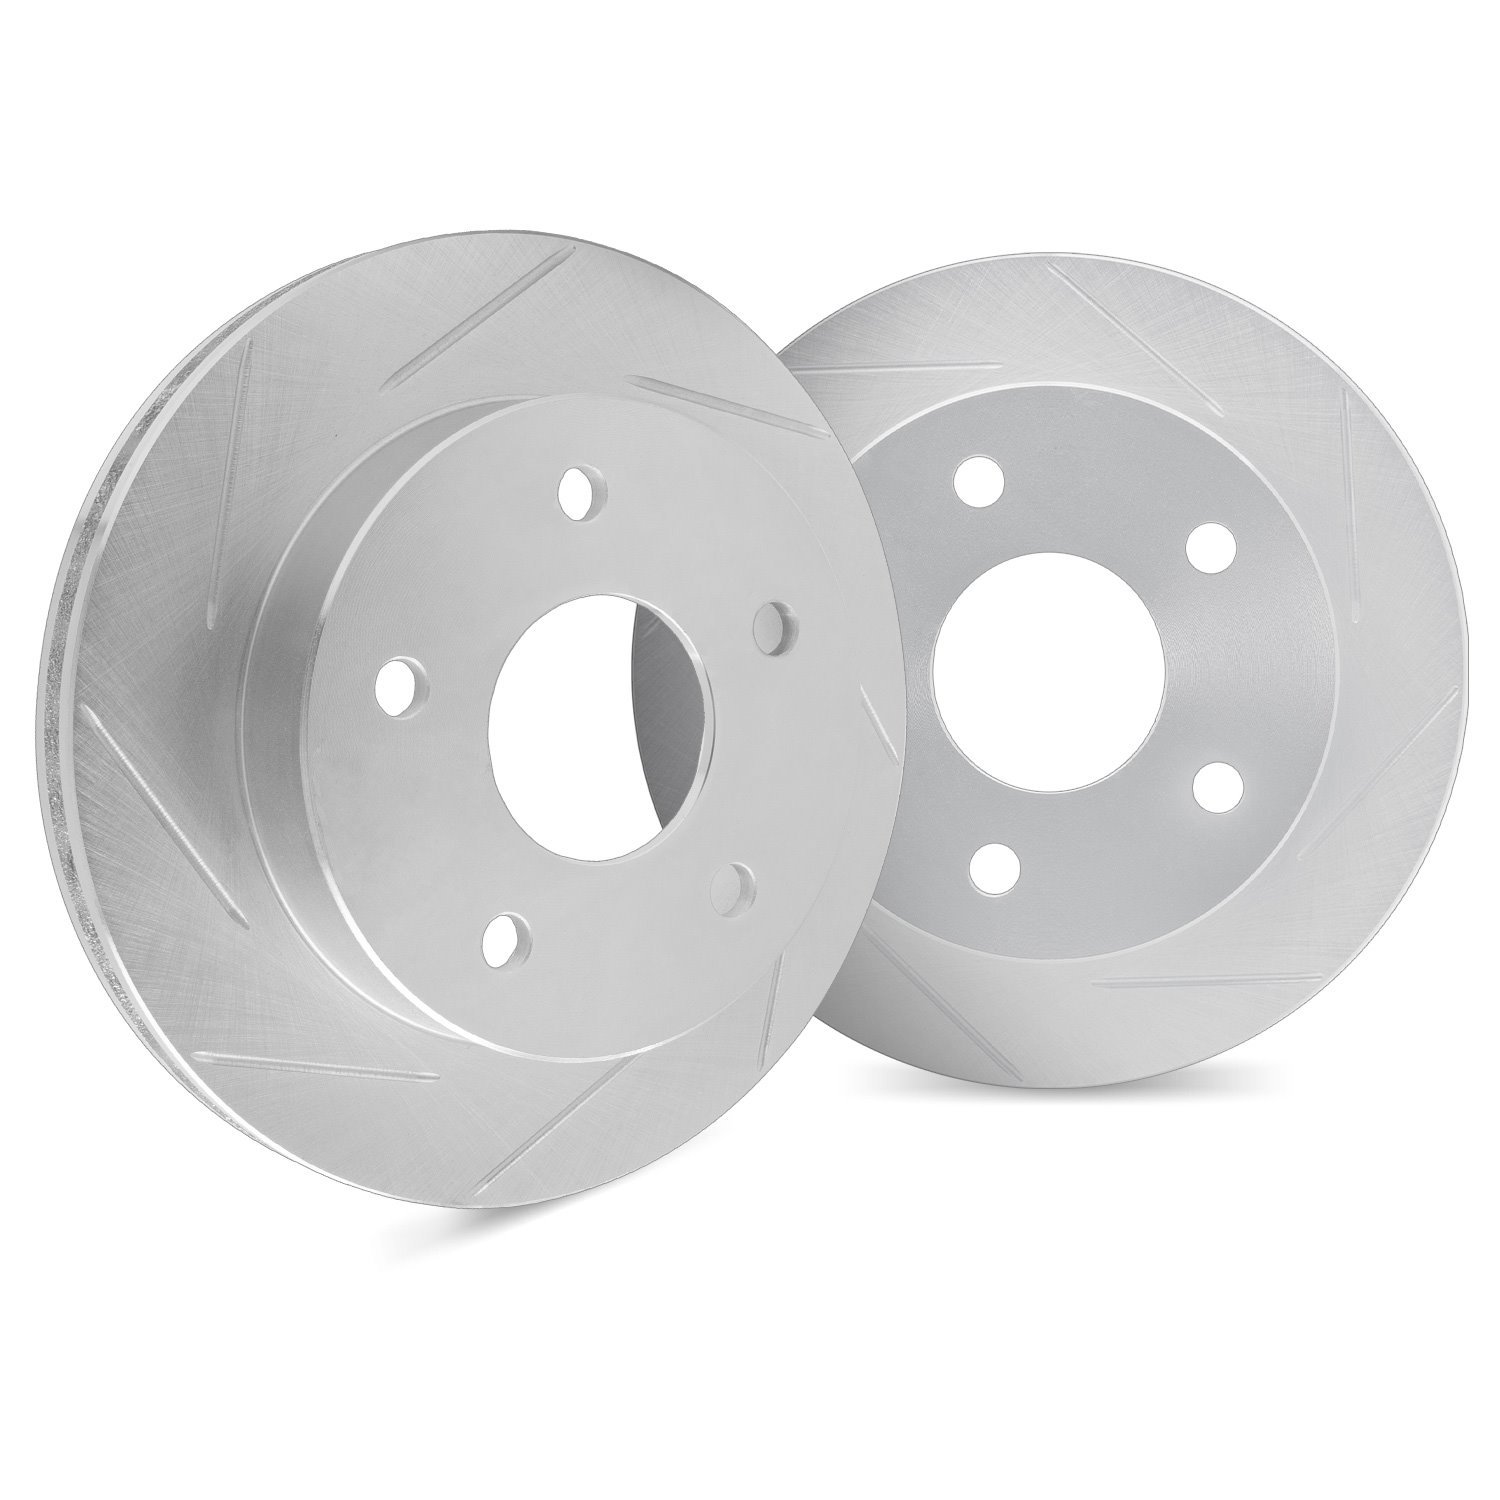 Slotted Brake Rotors [Silver], Fits Select Ford/Lincoln/Mercury/Mazda